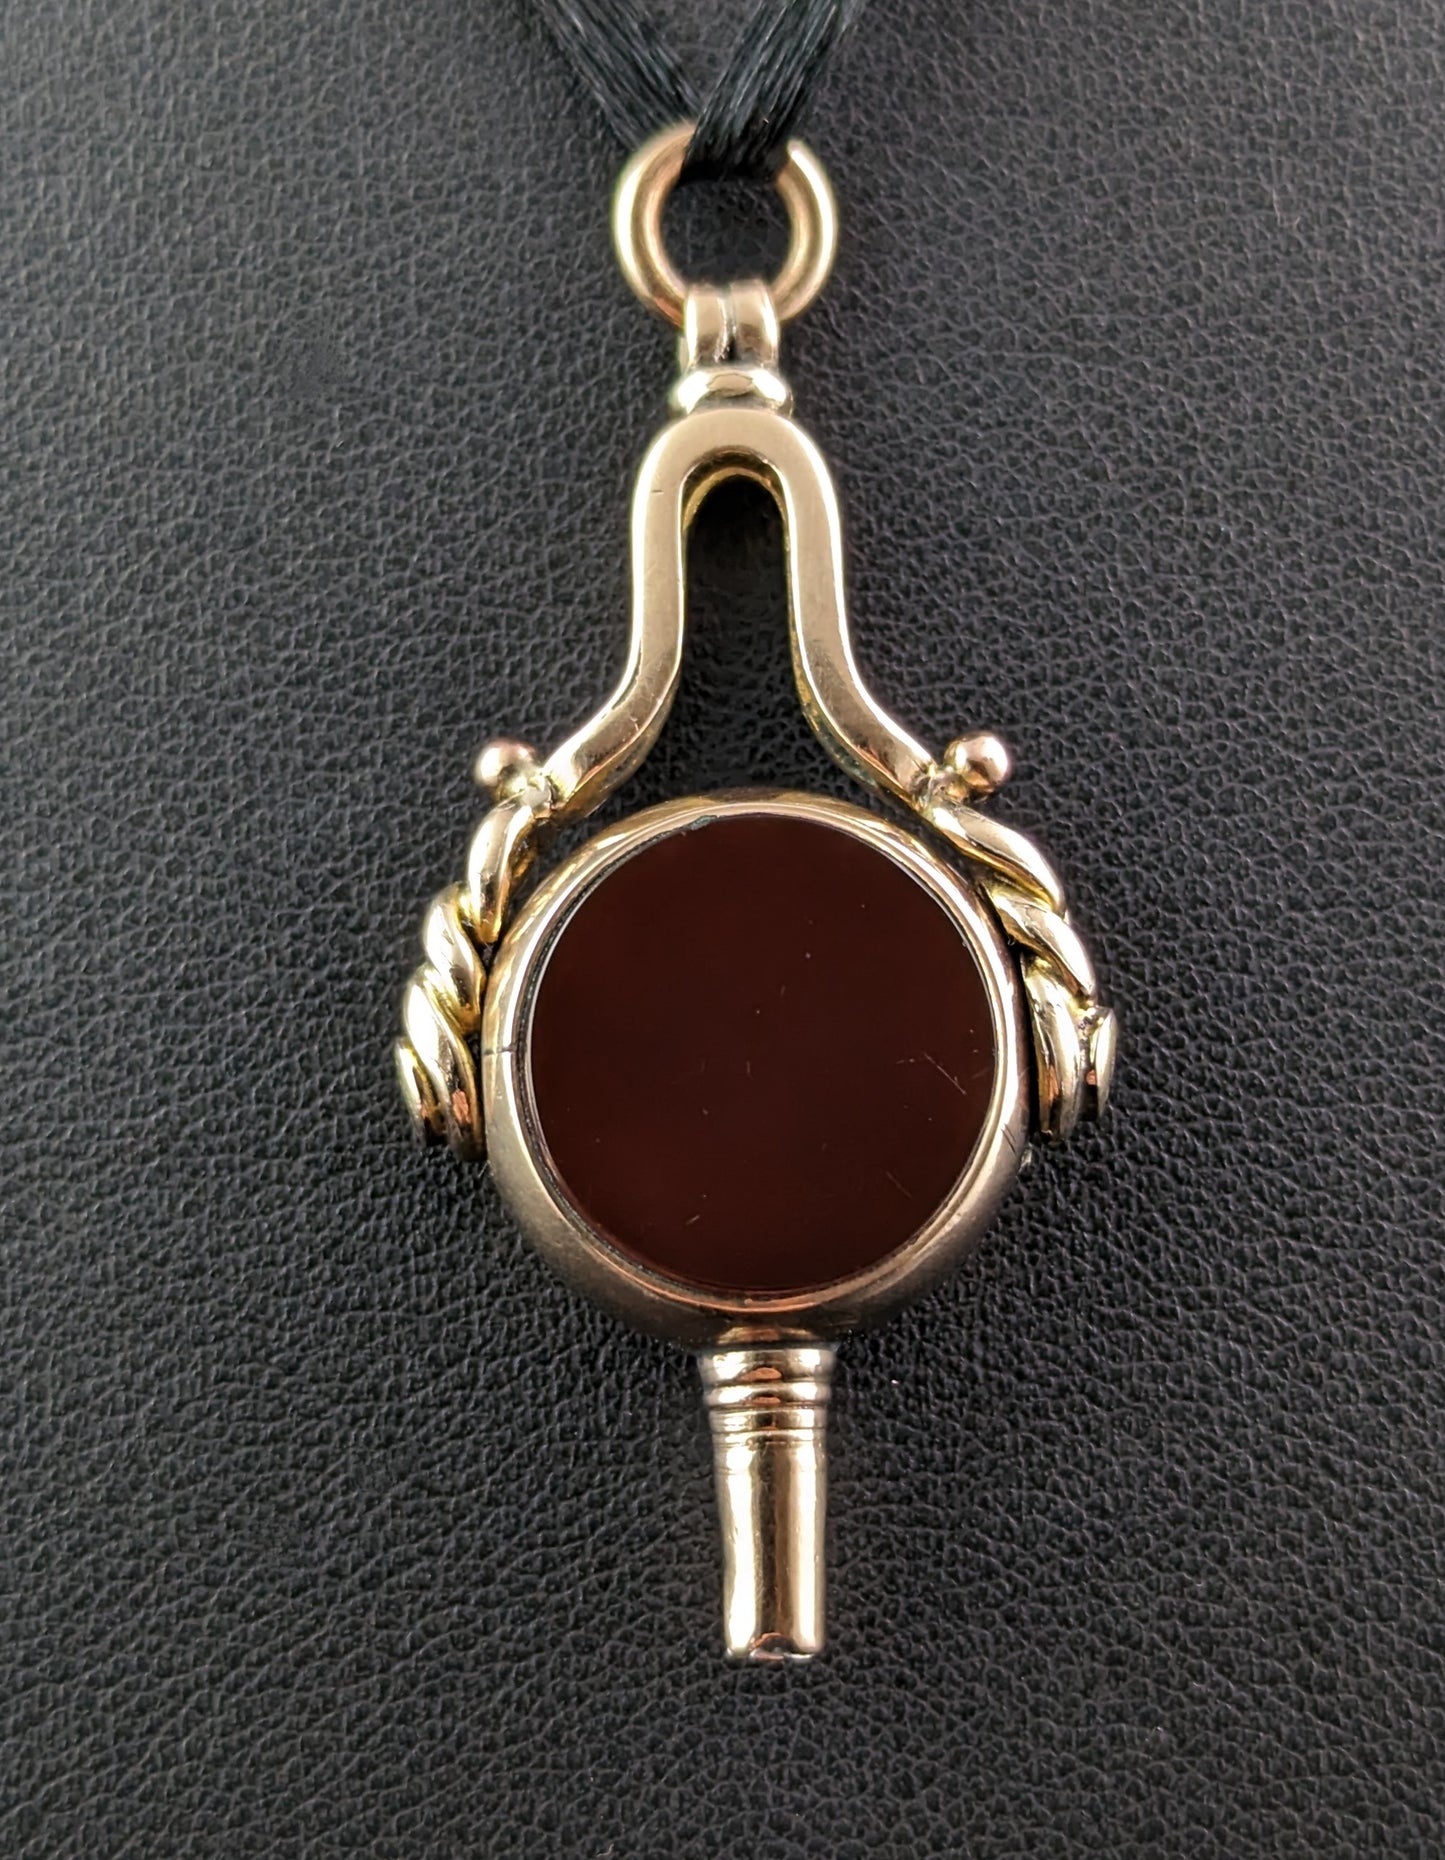 Antique 9ct gold Watch key seal fob pendant, Carnelian and Bloodstone